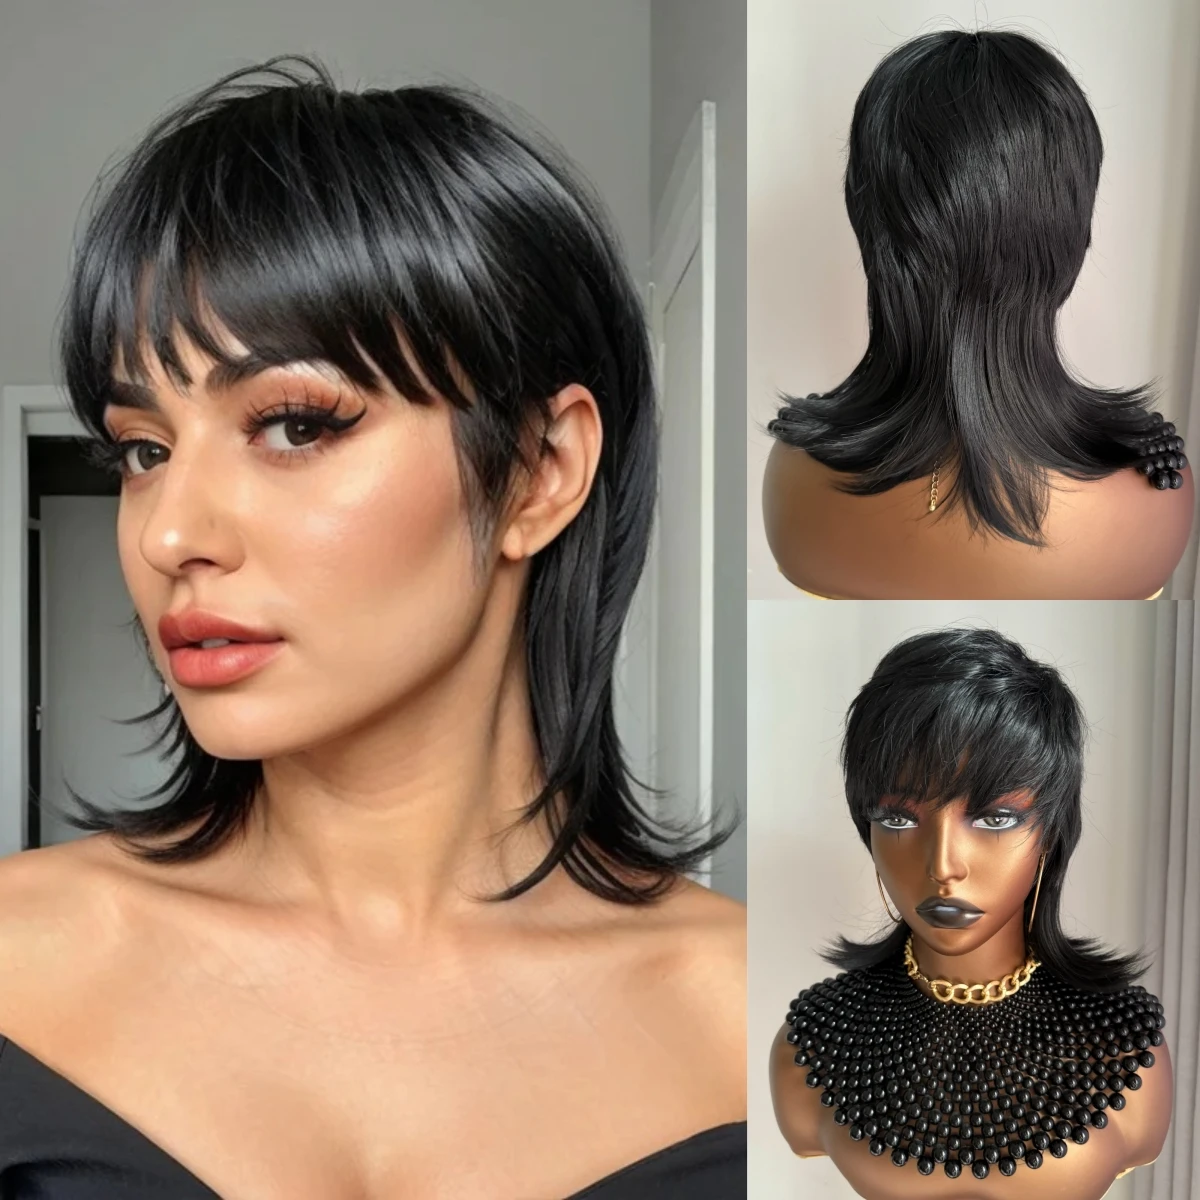 CUZ of HAIR Black Synthetic Short Straight Bob Pixie Cut Wigs Shaggy Layered 80s Mullet Wigs With Bangs For Black Women Daily виброхвост helios shaggy